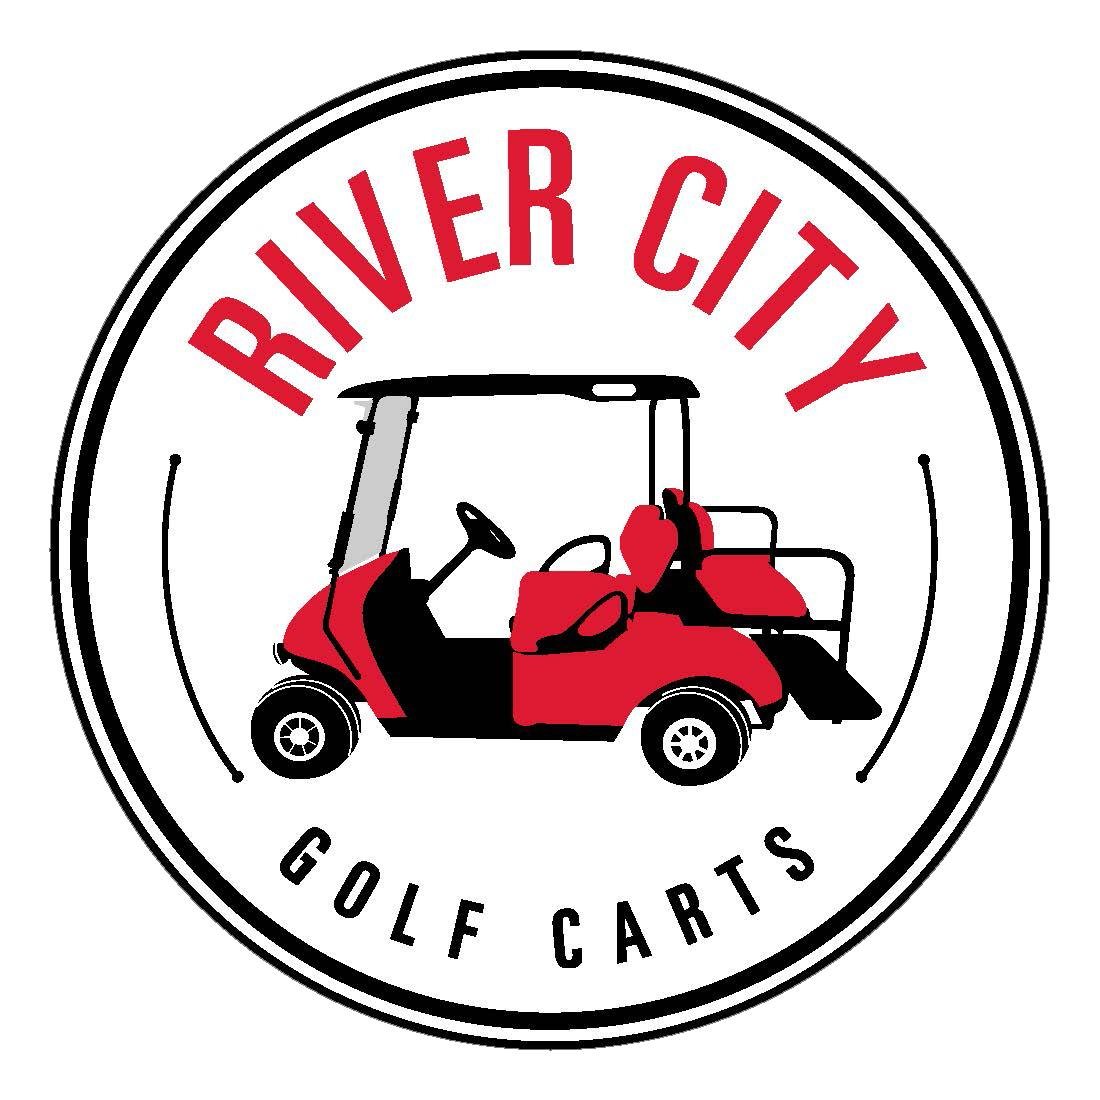 We're a locally owned, grown & operated business serving the needs of golf cart customers in Tappahannock & Northern Neck Virginia. New + Used + Parts + Service